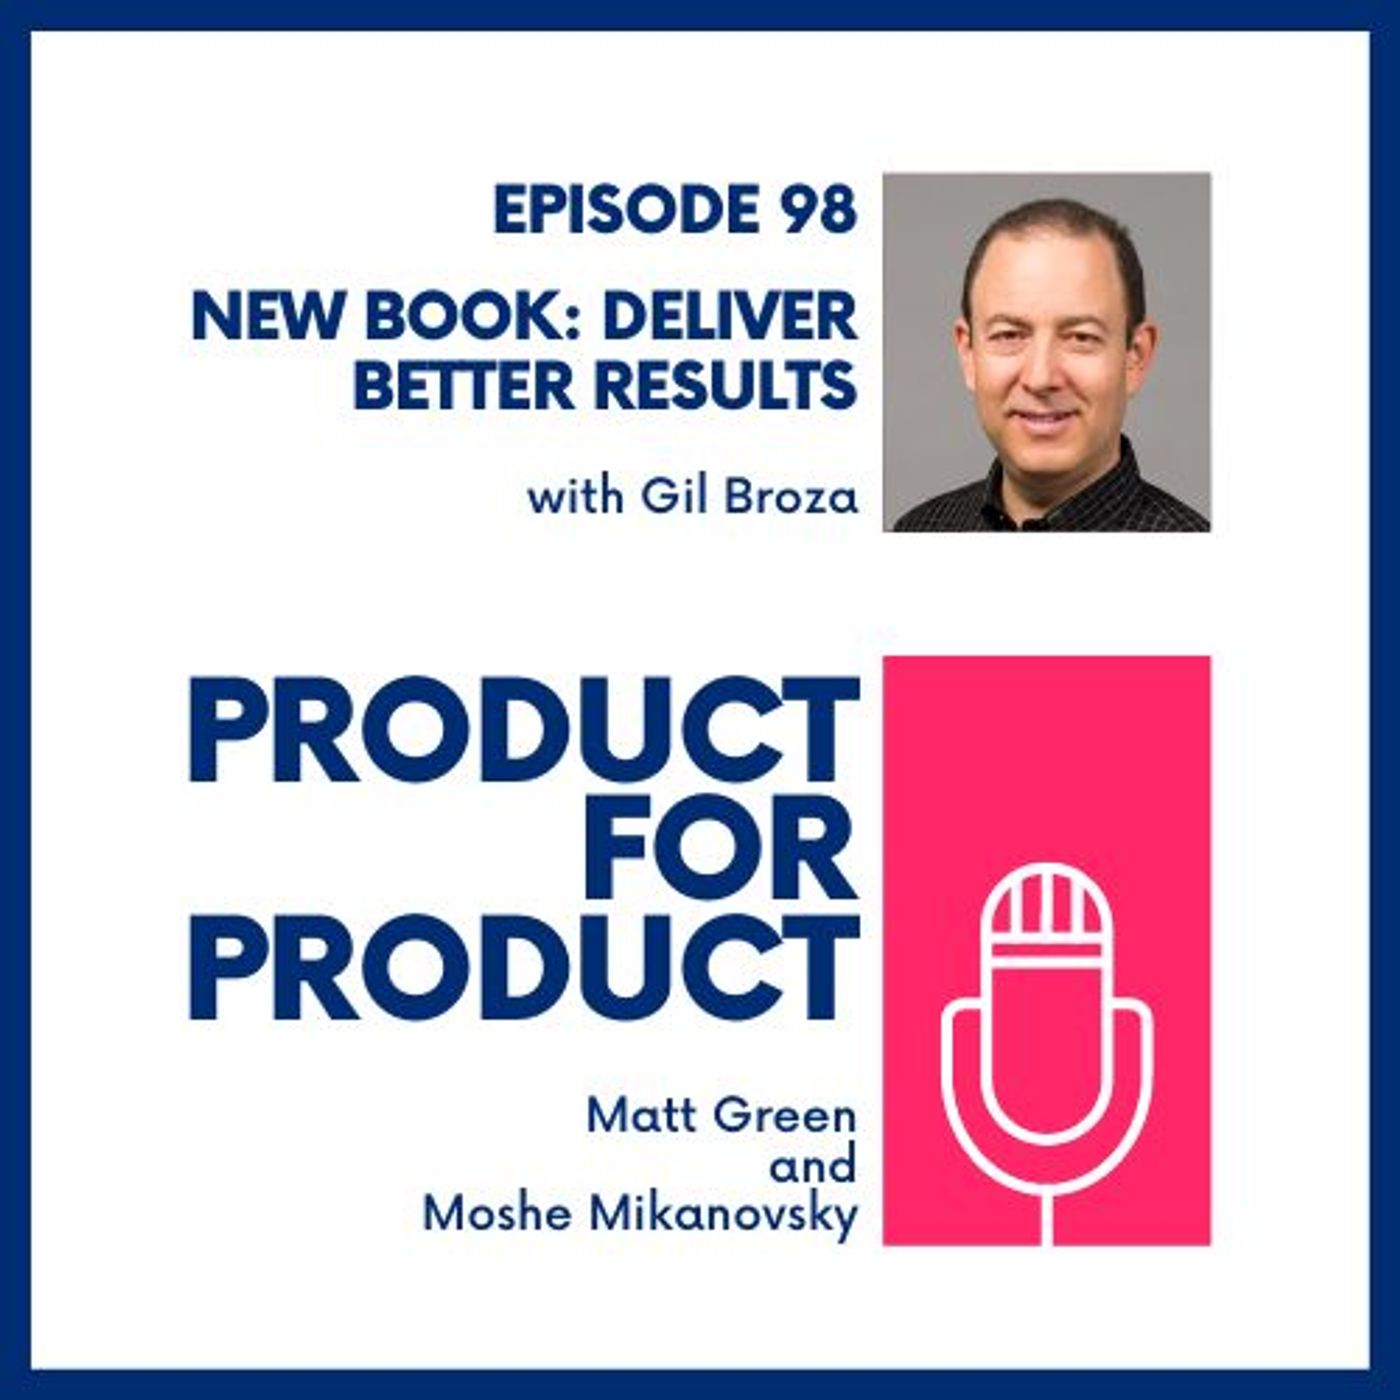 EP 98 - Deliver Better Results with Gil Broza